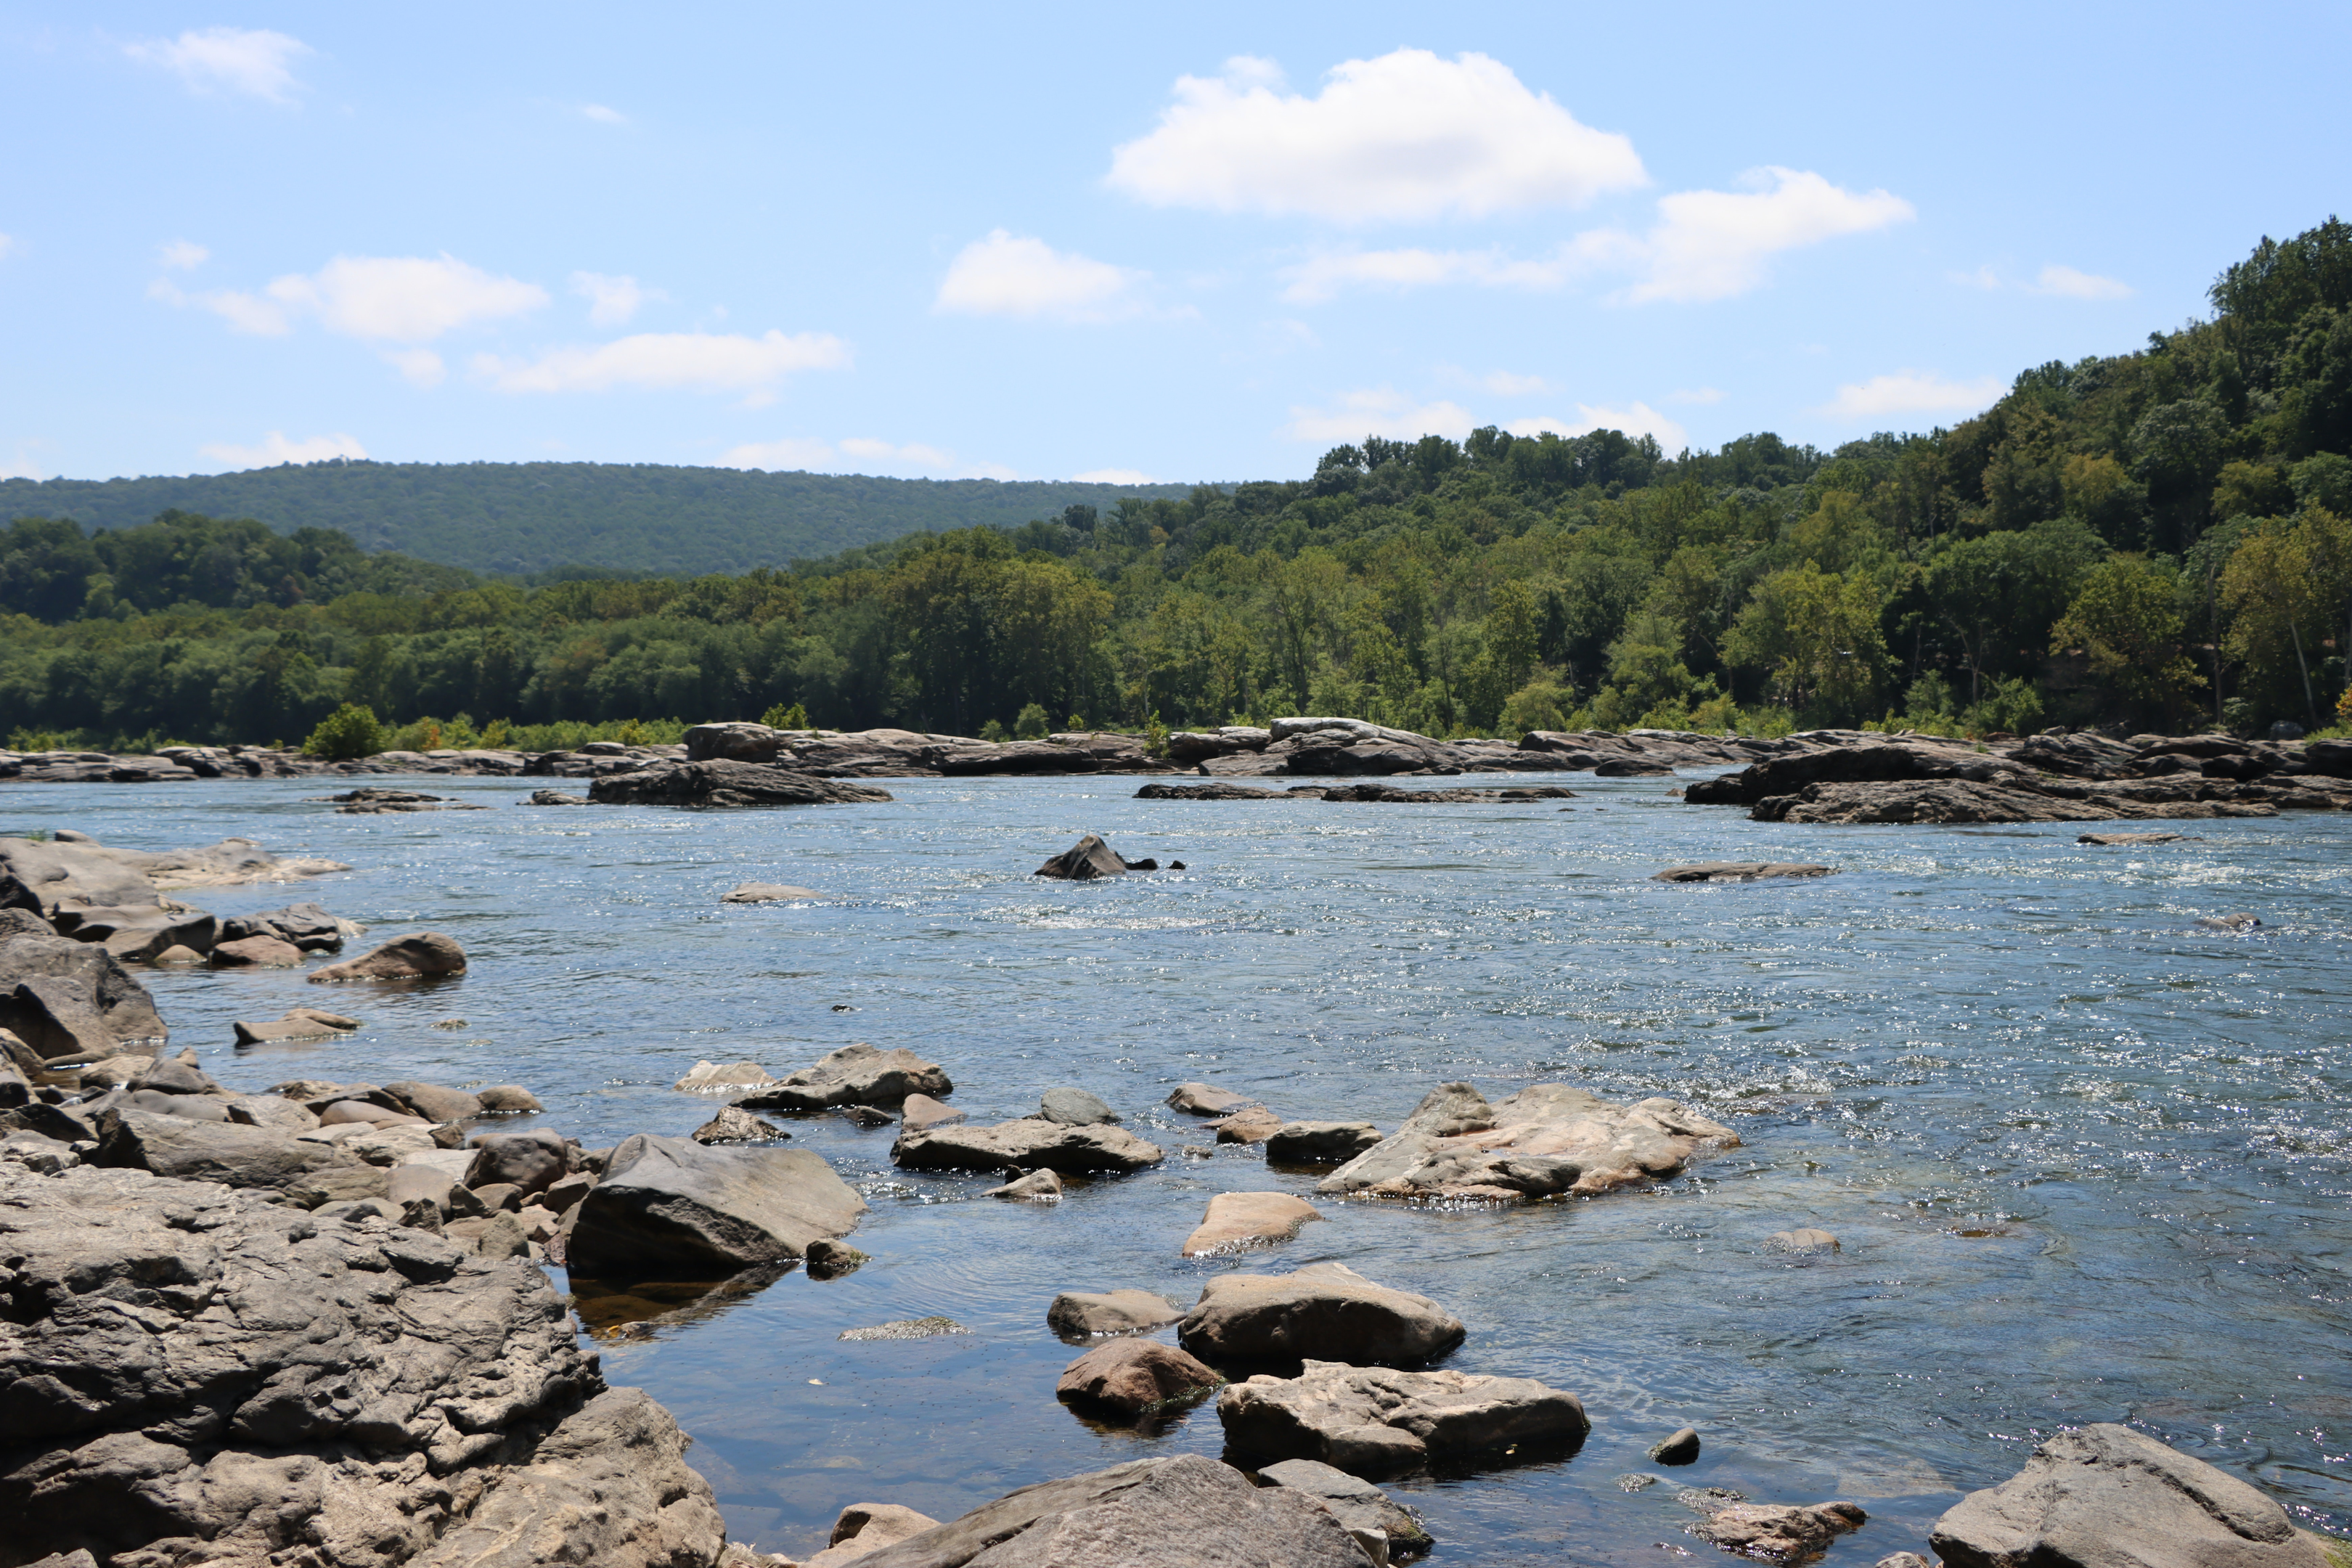 Let's team up and protect the water quality of the Potomac River together.